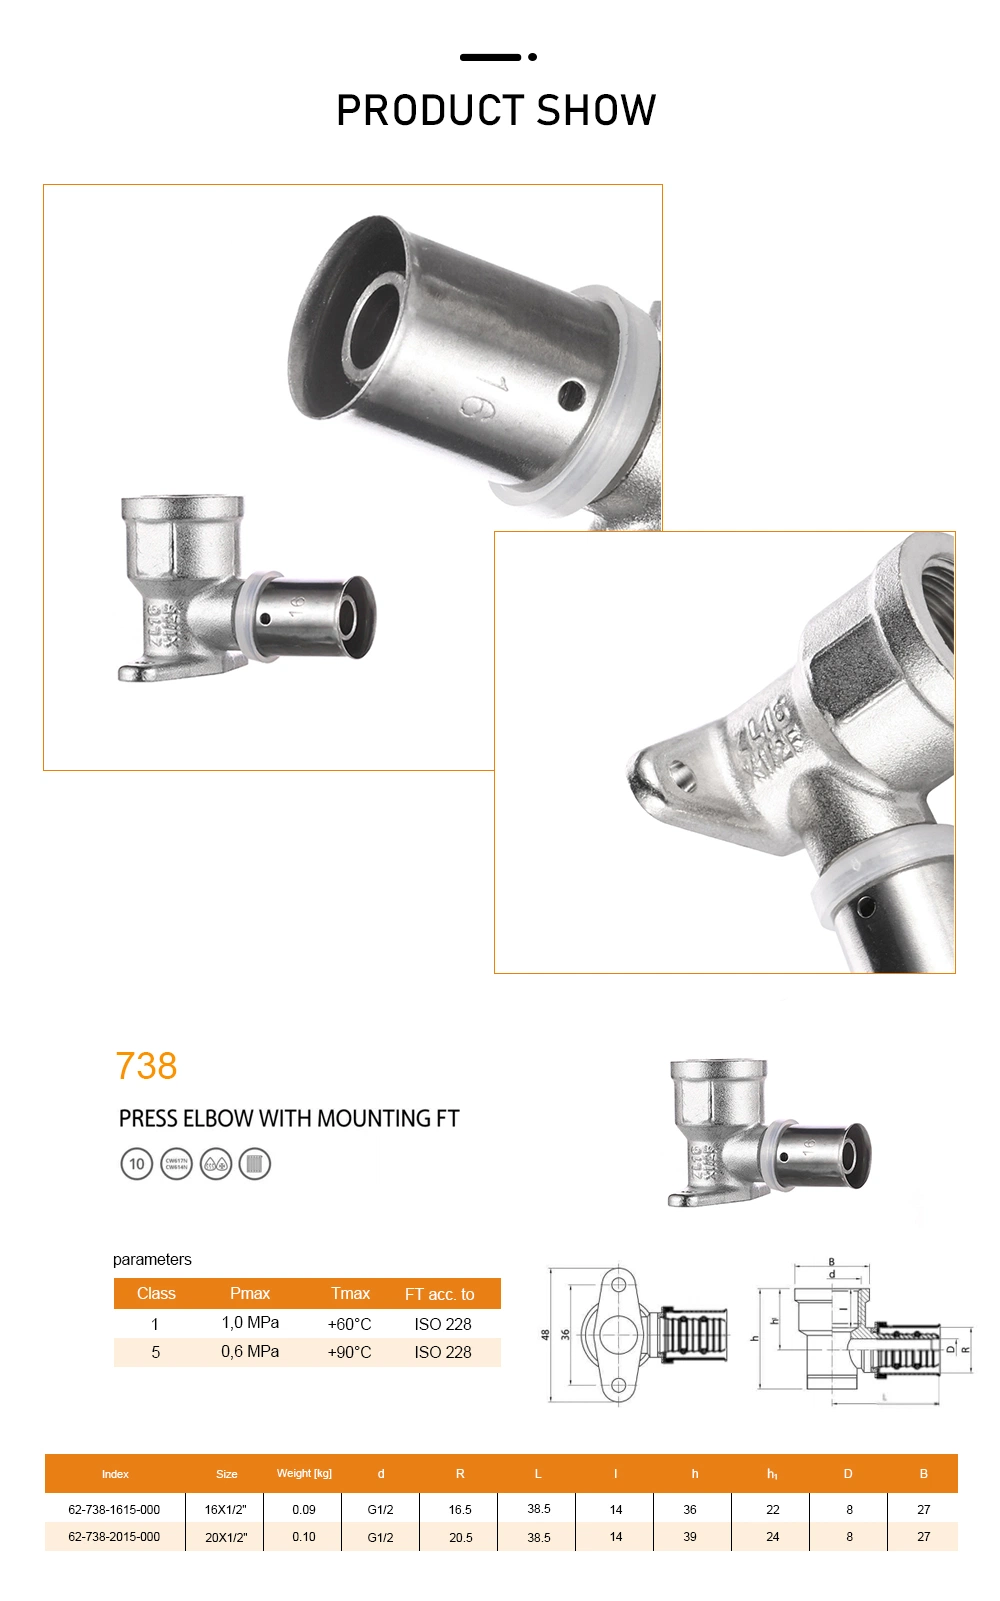 90 Degree Seated Elbow Pex Press Fittings for Kictchen, Home, Commercial, Garden